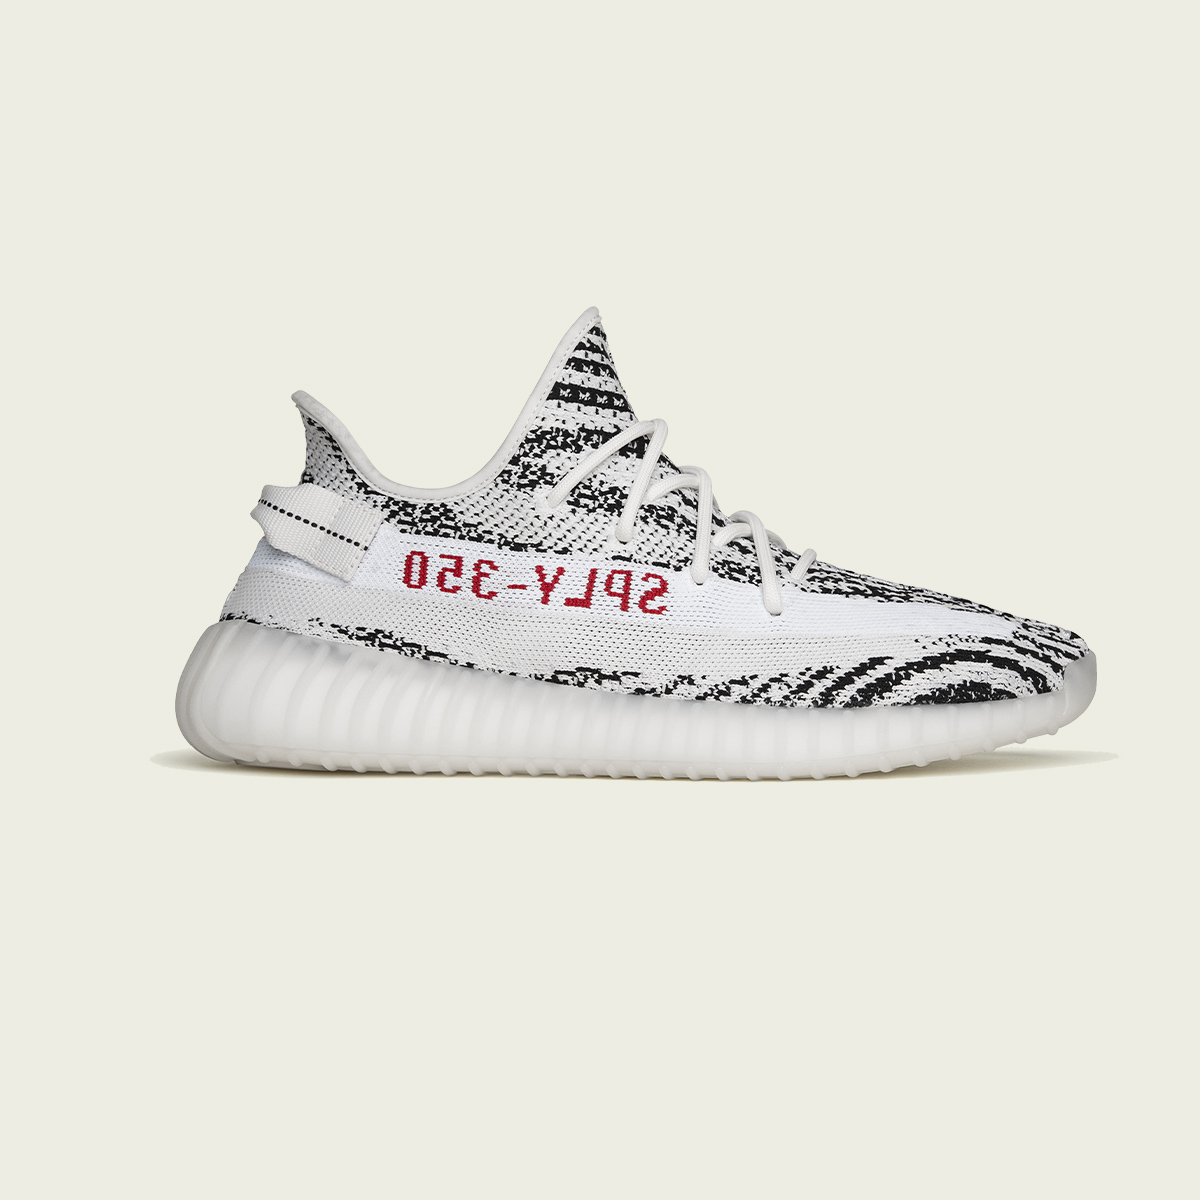 Foot on Twitter: "#YEEZY BOOST V2 'ZEBRA' LAUNCHES APRIL 9TH IN MEN'S SIZES. Reservations are now open via Foot Locker App. https://t.co/Ic42omPHXP" / Twitter